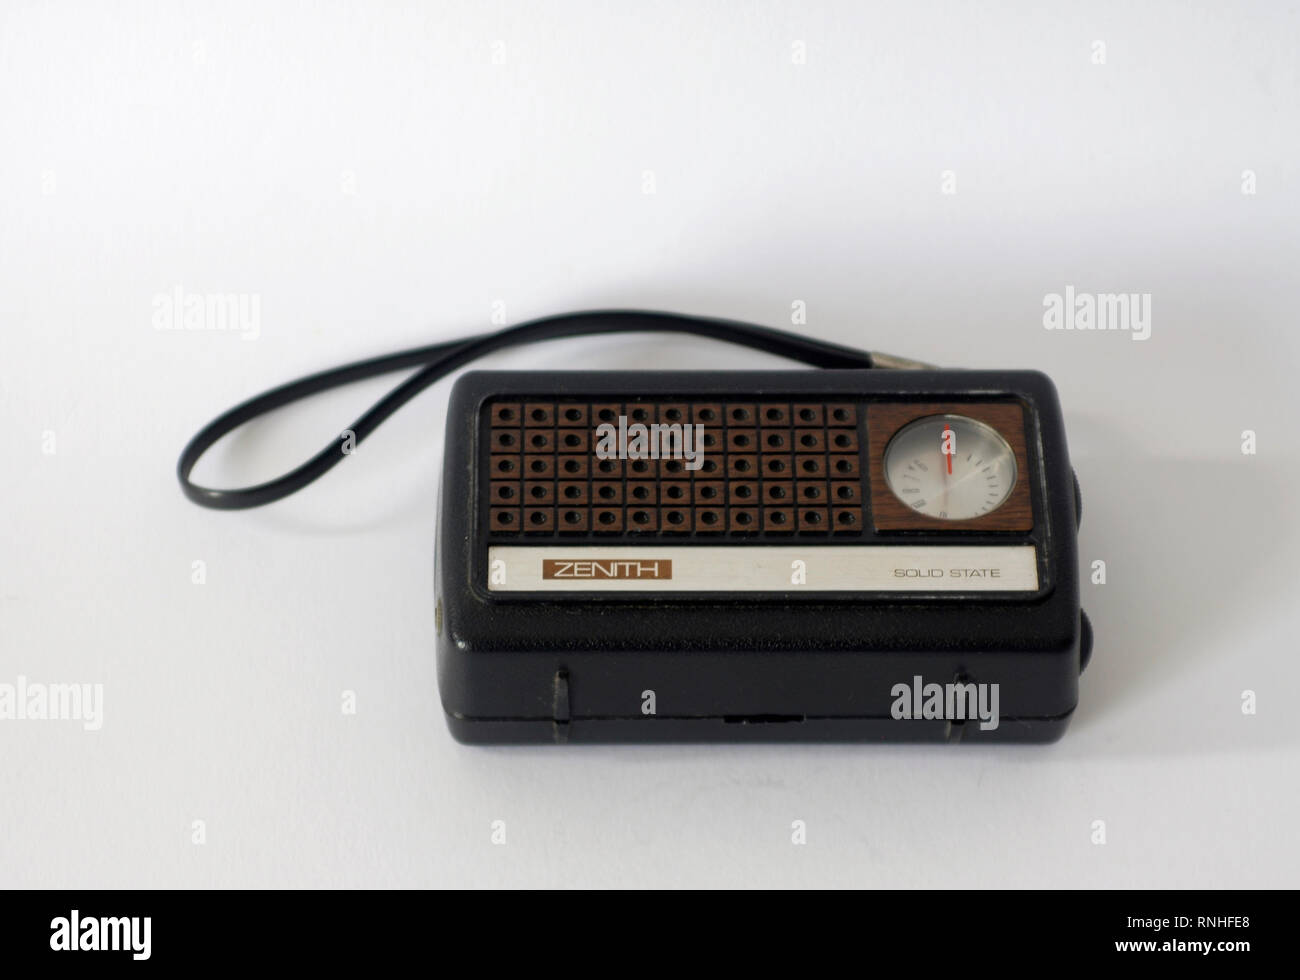 Vintage Portable Transistor Radio Zenith Solid State. Made in Singapore  Stock Photo - Alamy